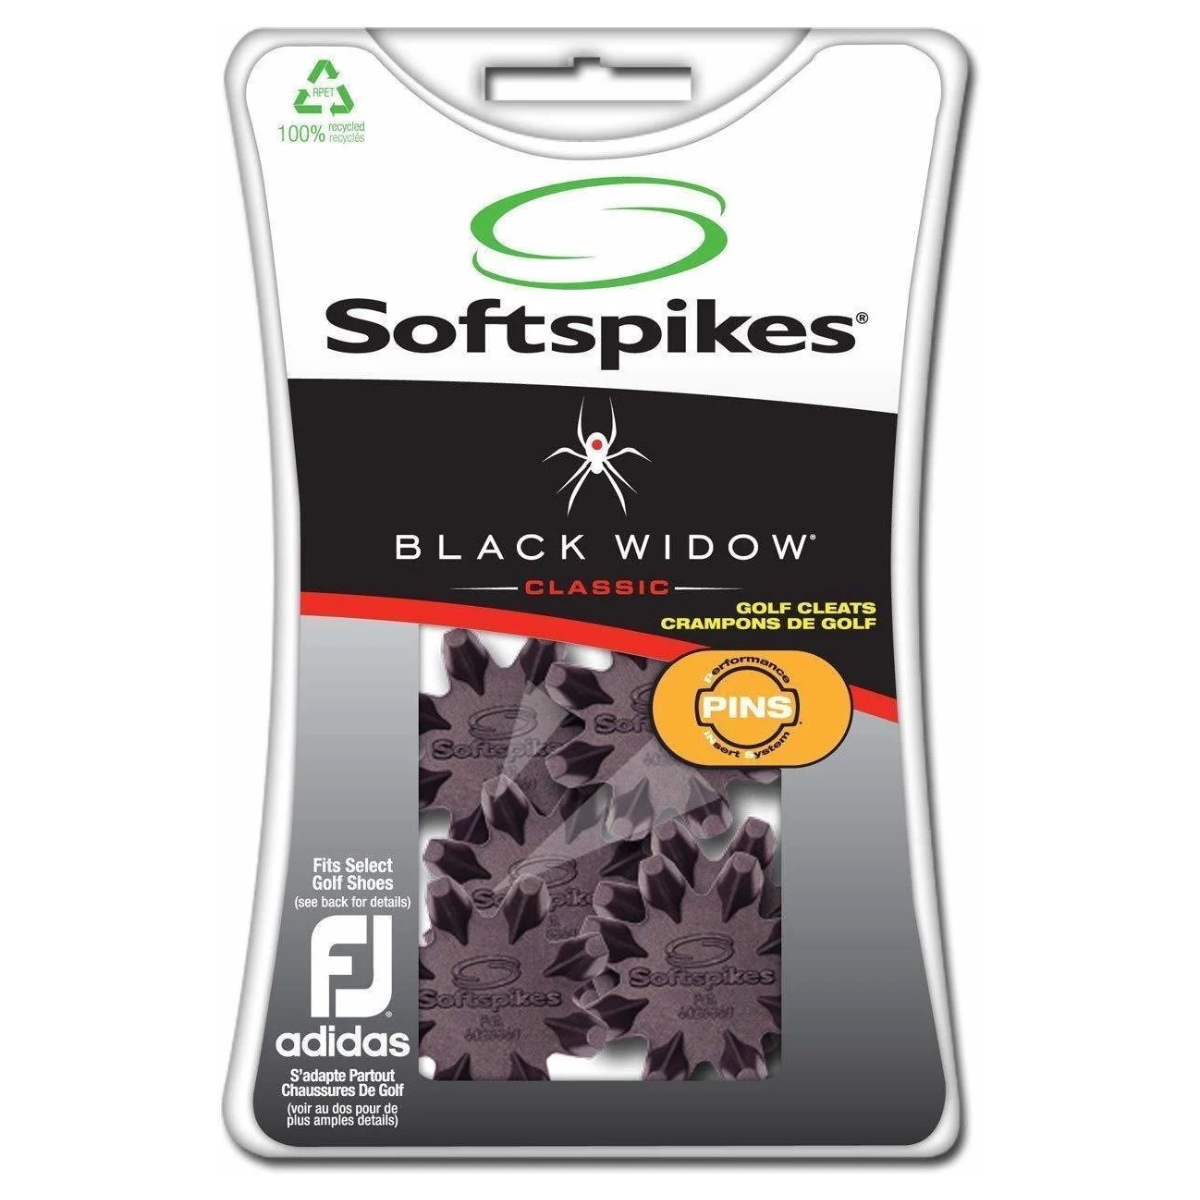 Masters SoftSpikes Black Widow Pins